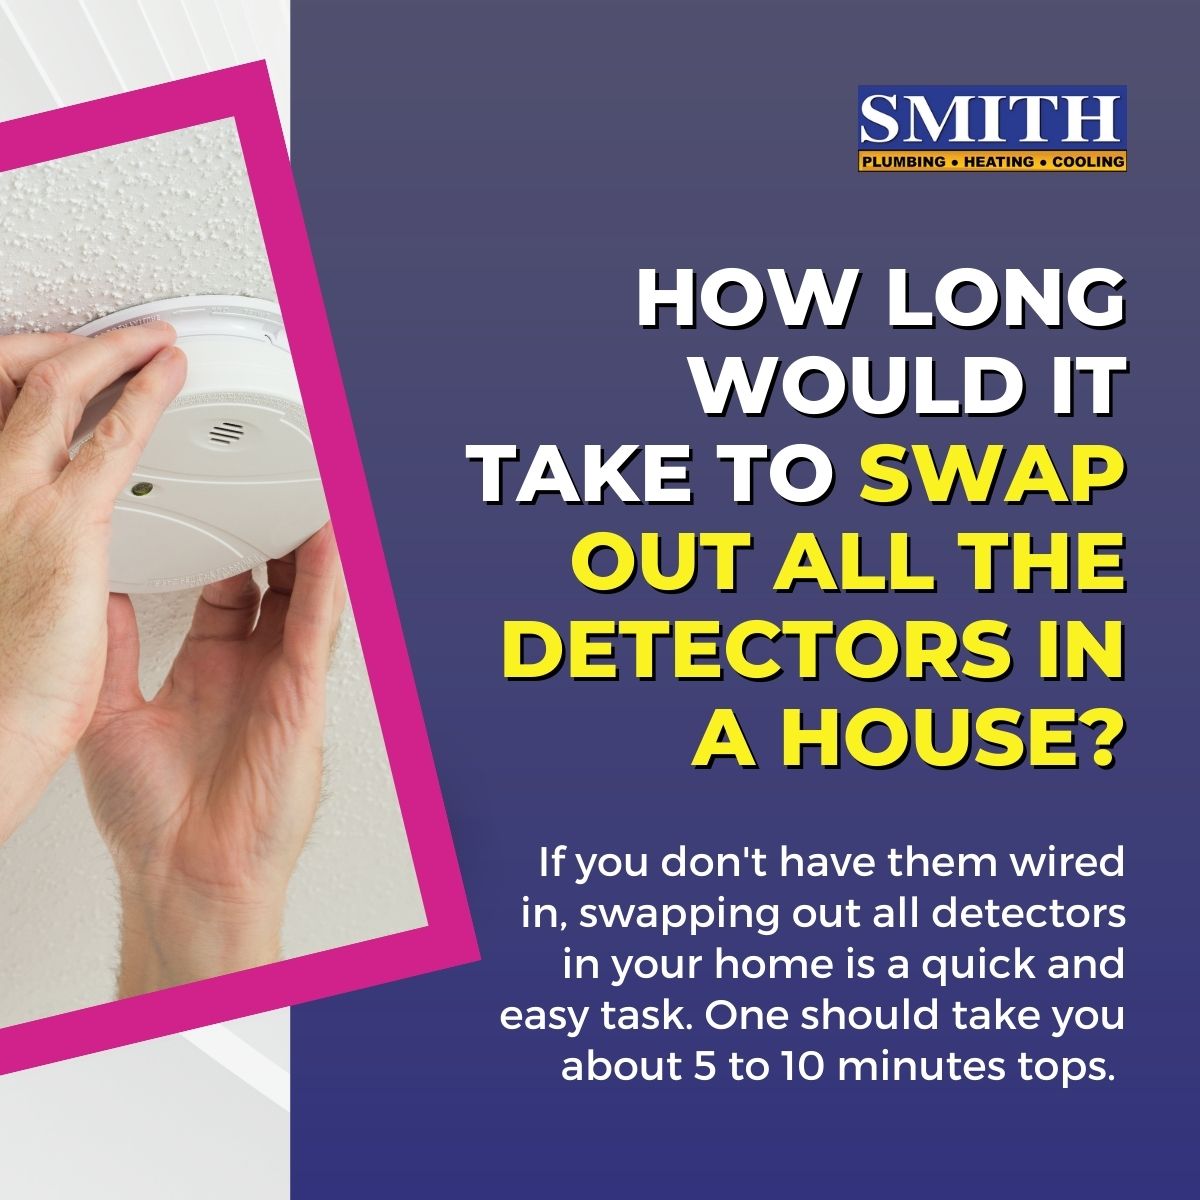 How long would it take to swap out all the detectors in a house?